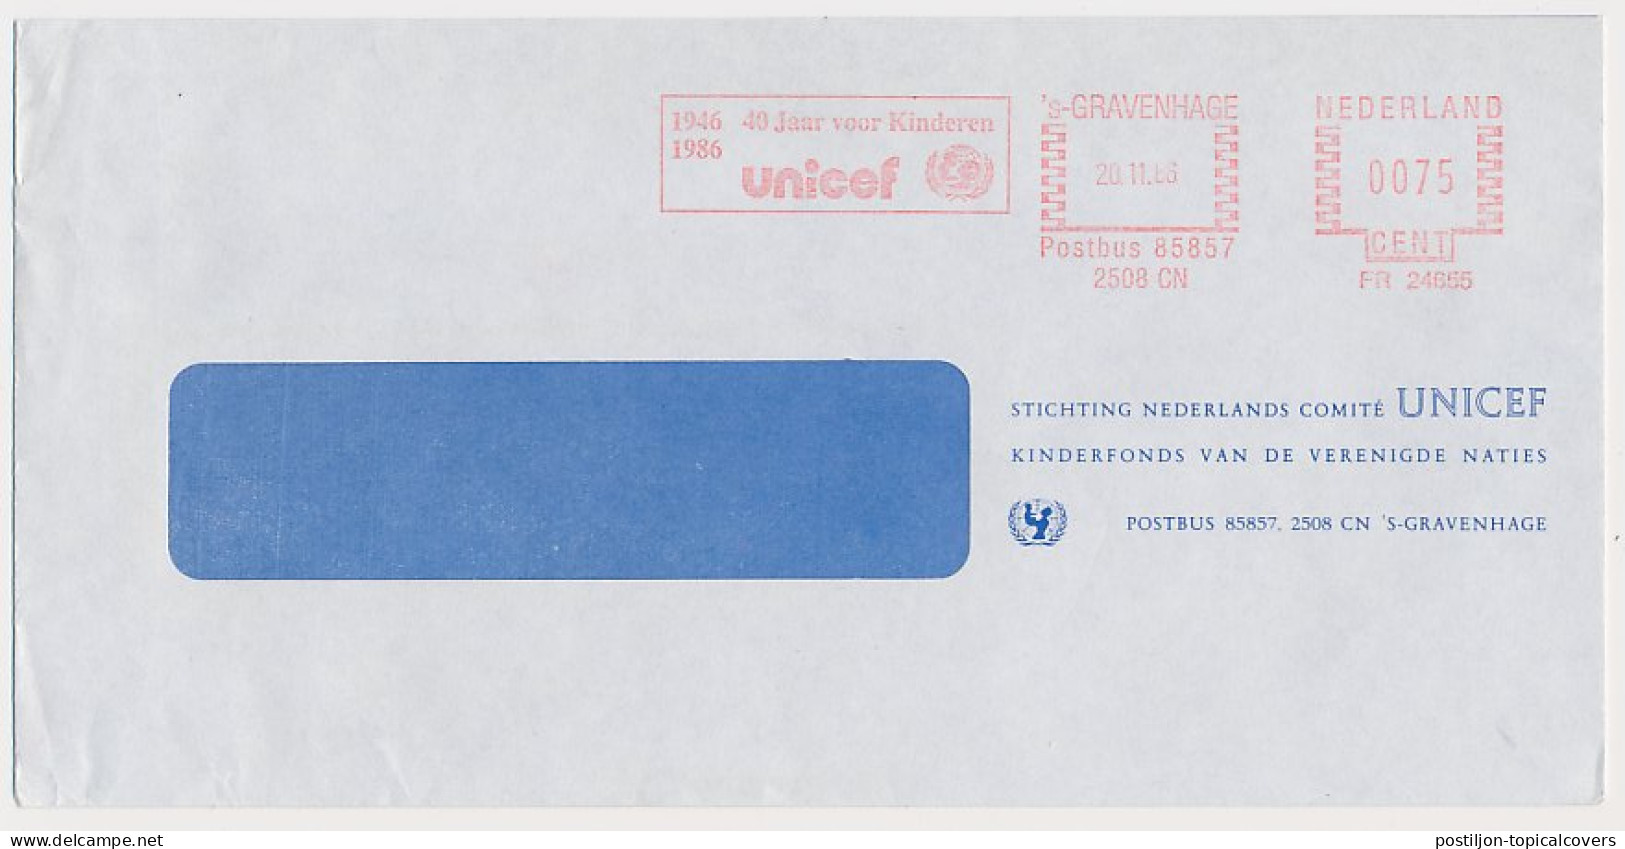 Meter Cover Netherlands 1986 UNICEF - 40 Years For Children - UNO